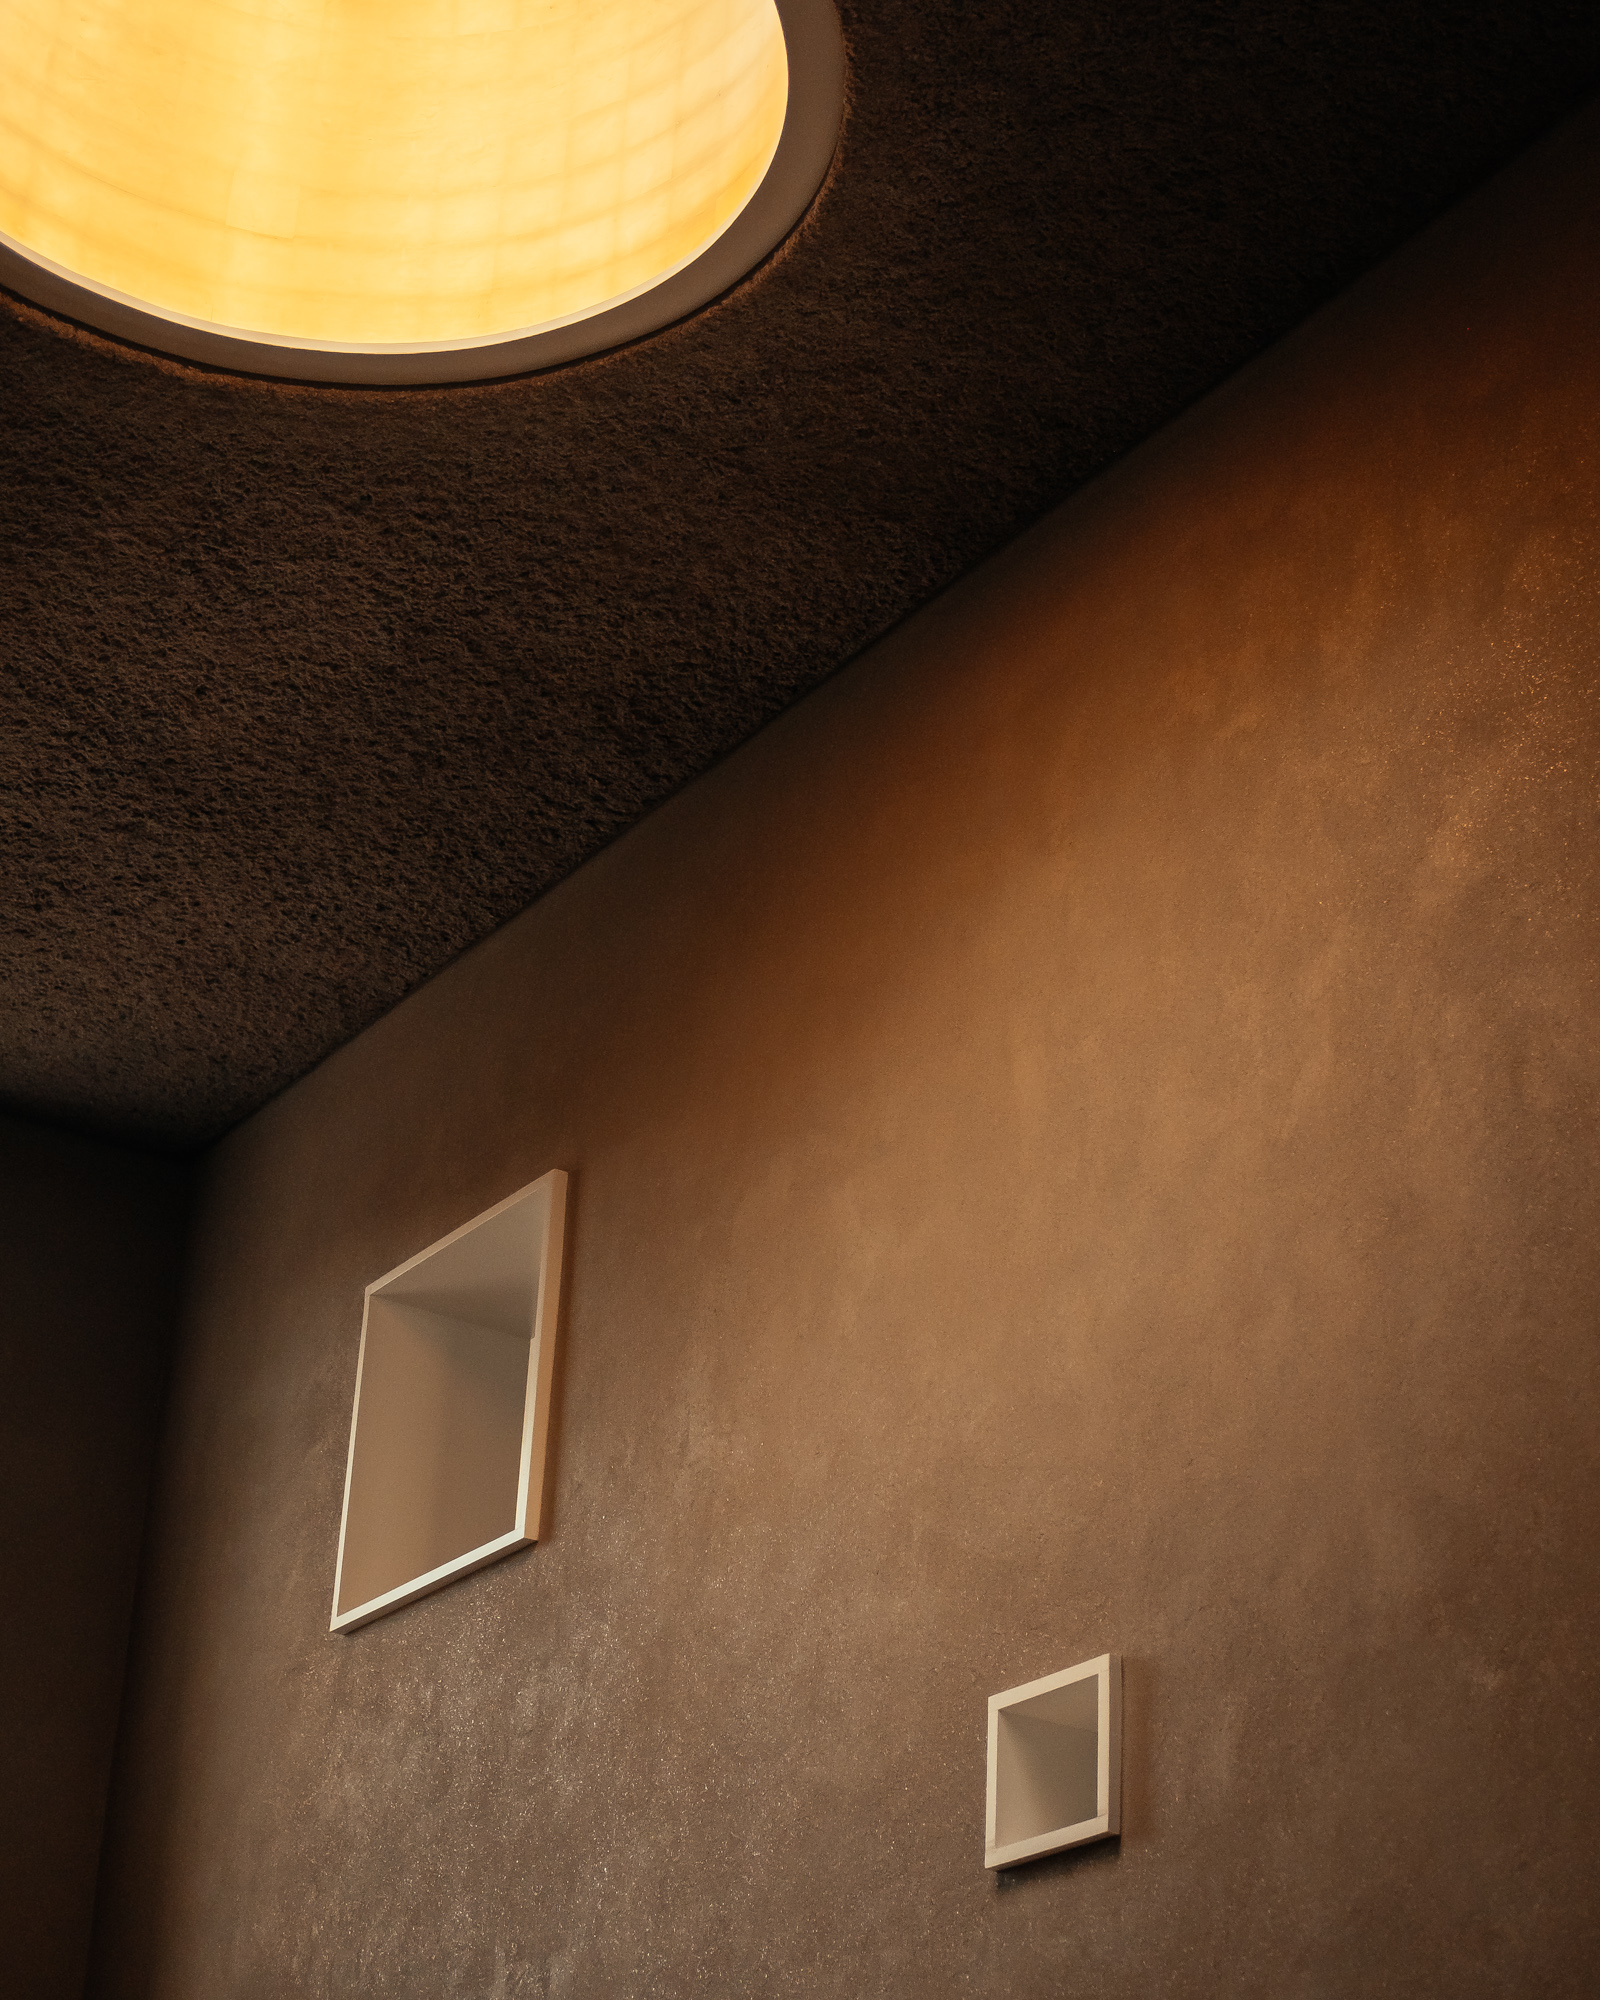 A close up of a brown wall with two small windows in it and a brown ceiling with a hole in it for a Christmas tree